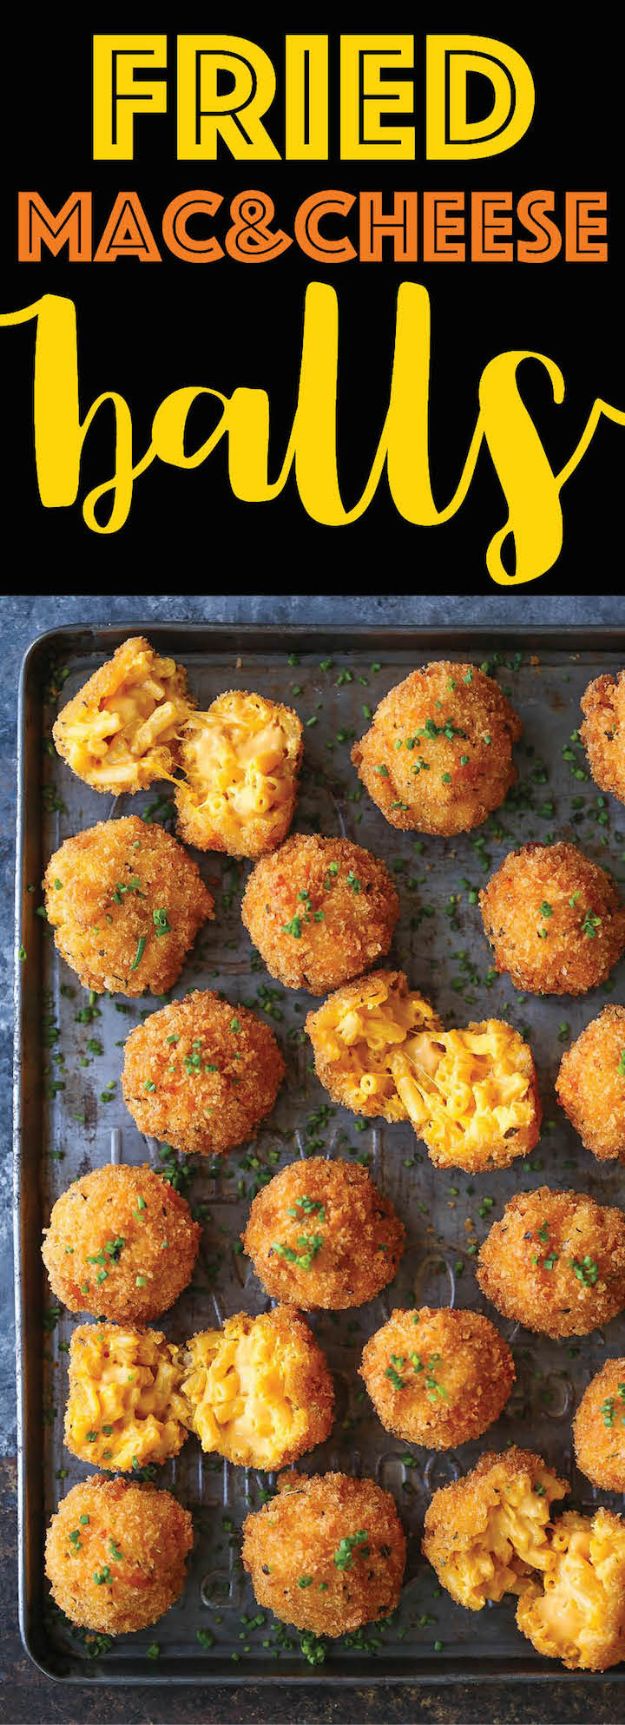 Mac and Cheese Recipes | Fried Mac and Cheese Balls - Easy Recipe Ideas for Macaroni and Cheese - Quick Side Dishes